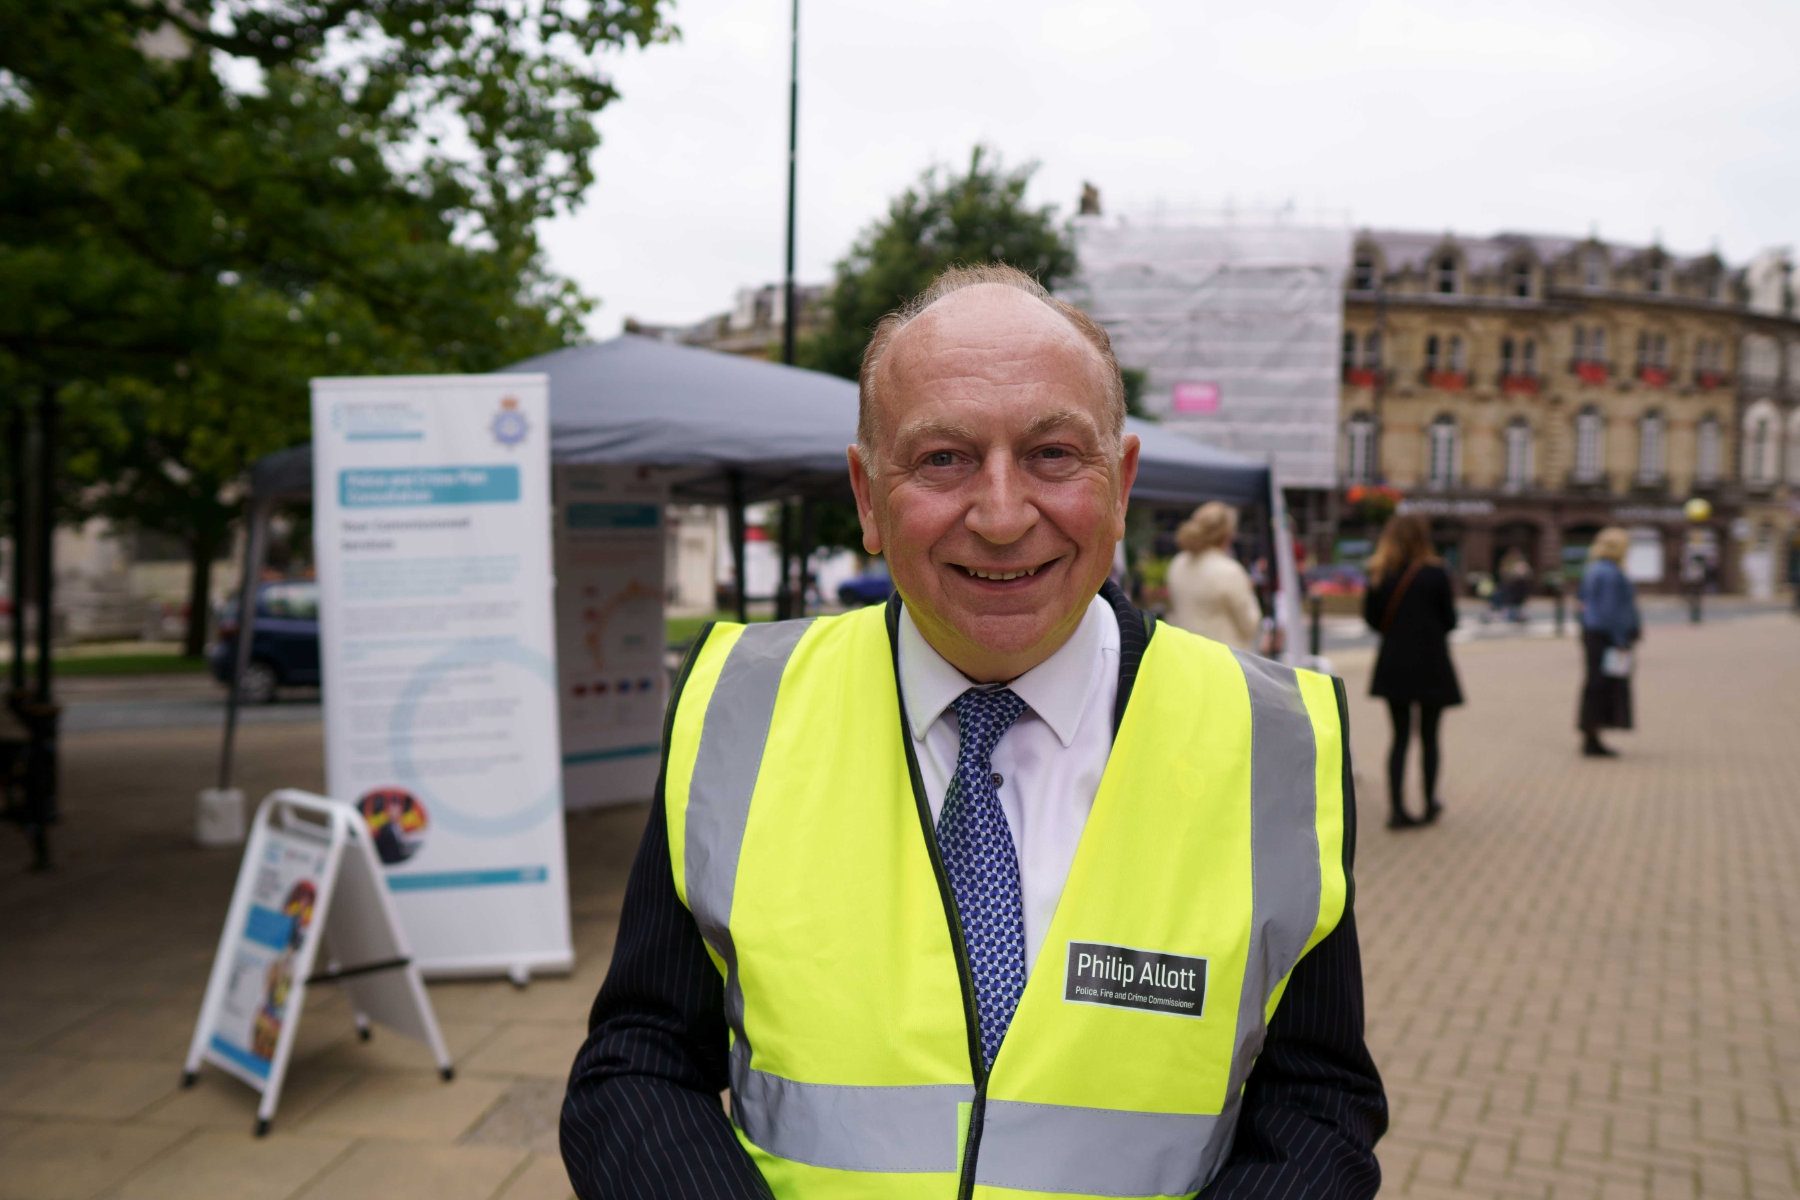 Philip Allot, Police, Fire and Crime Commissioner for North Yorkshire